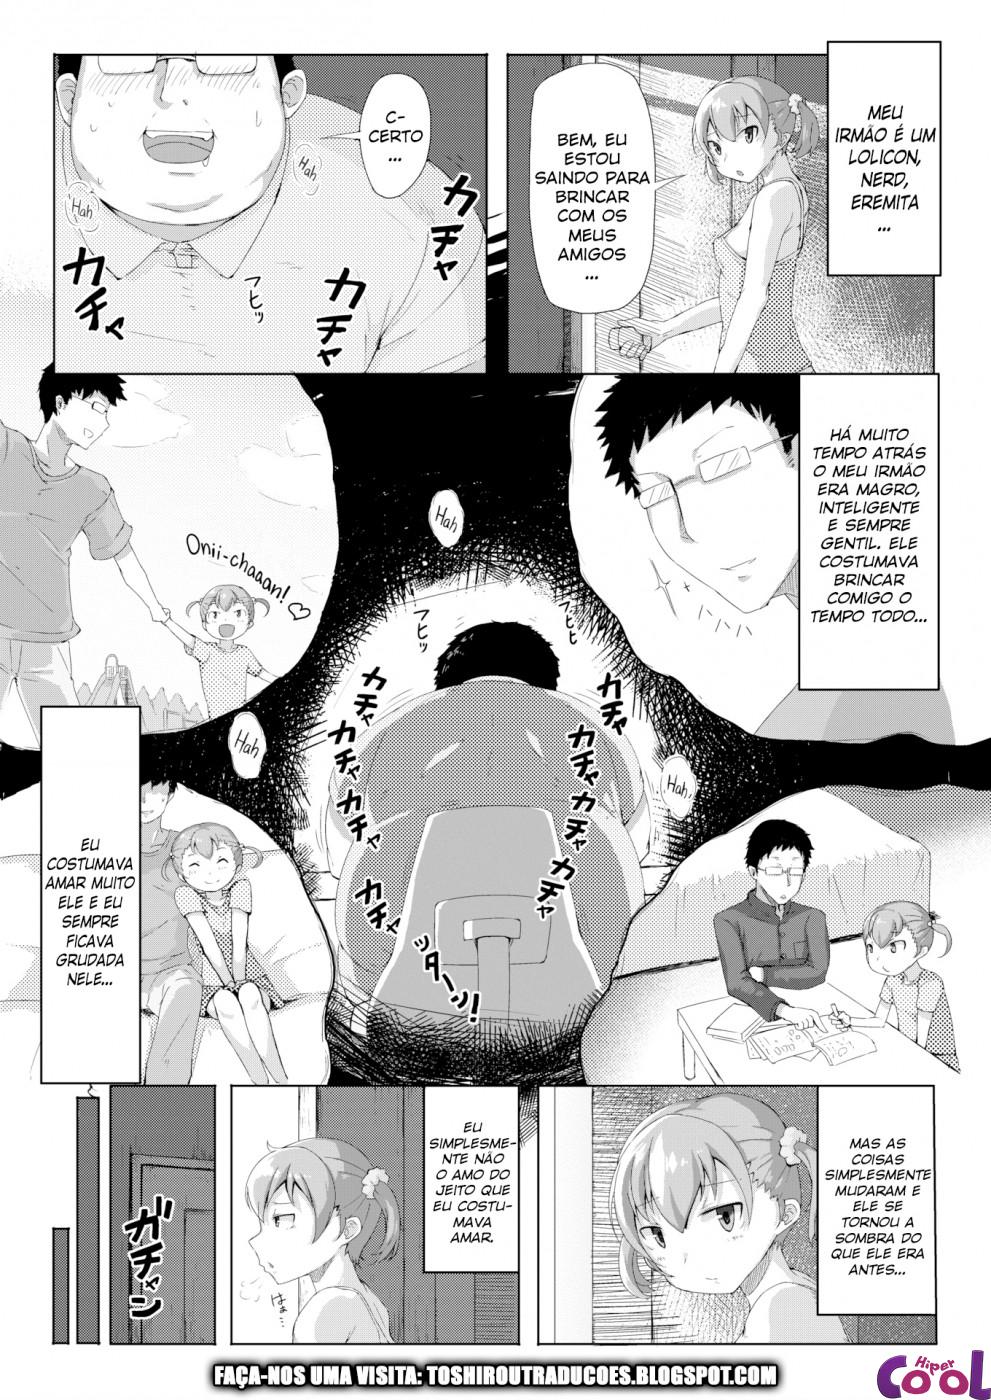 lenient-little-sister-chapter-01-page-2.jpg